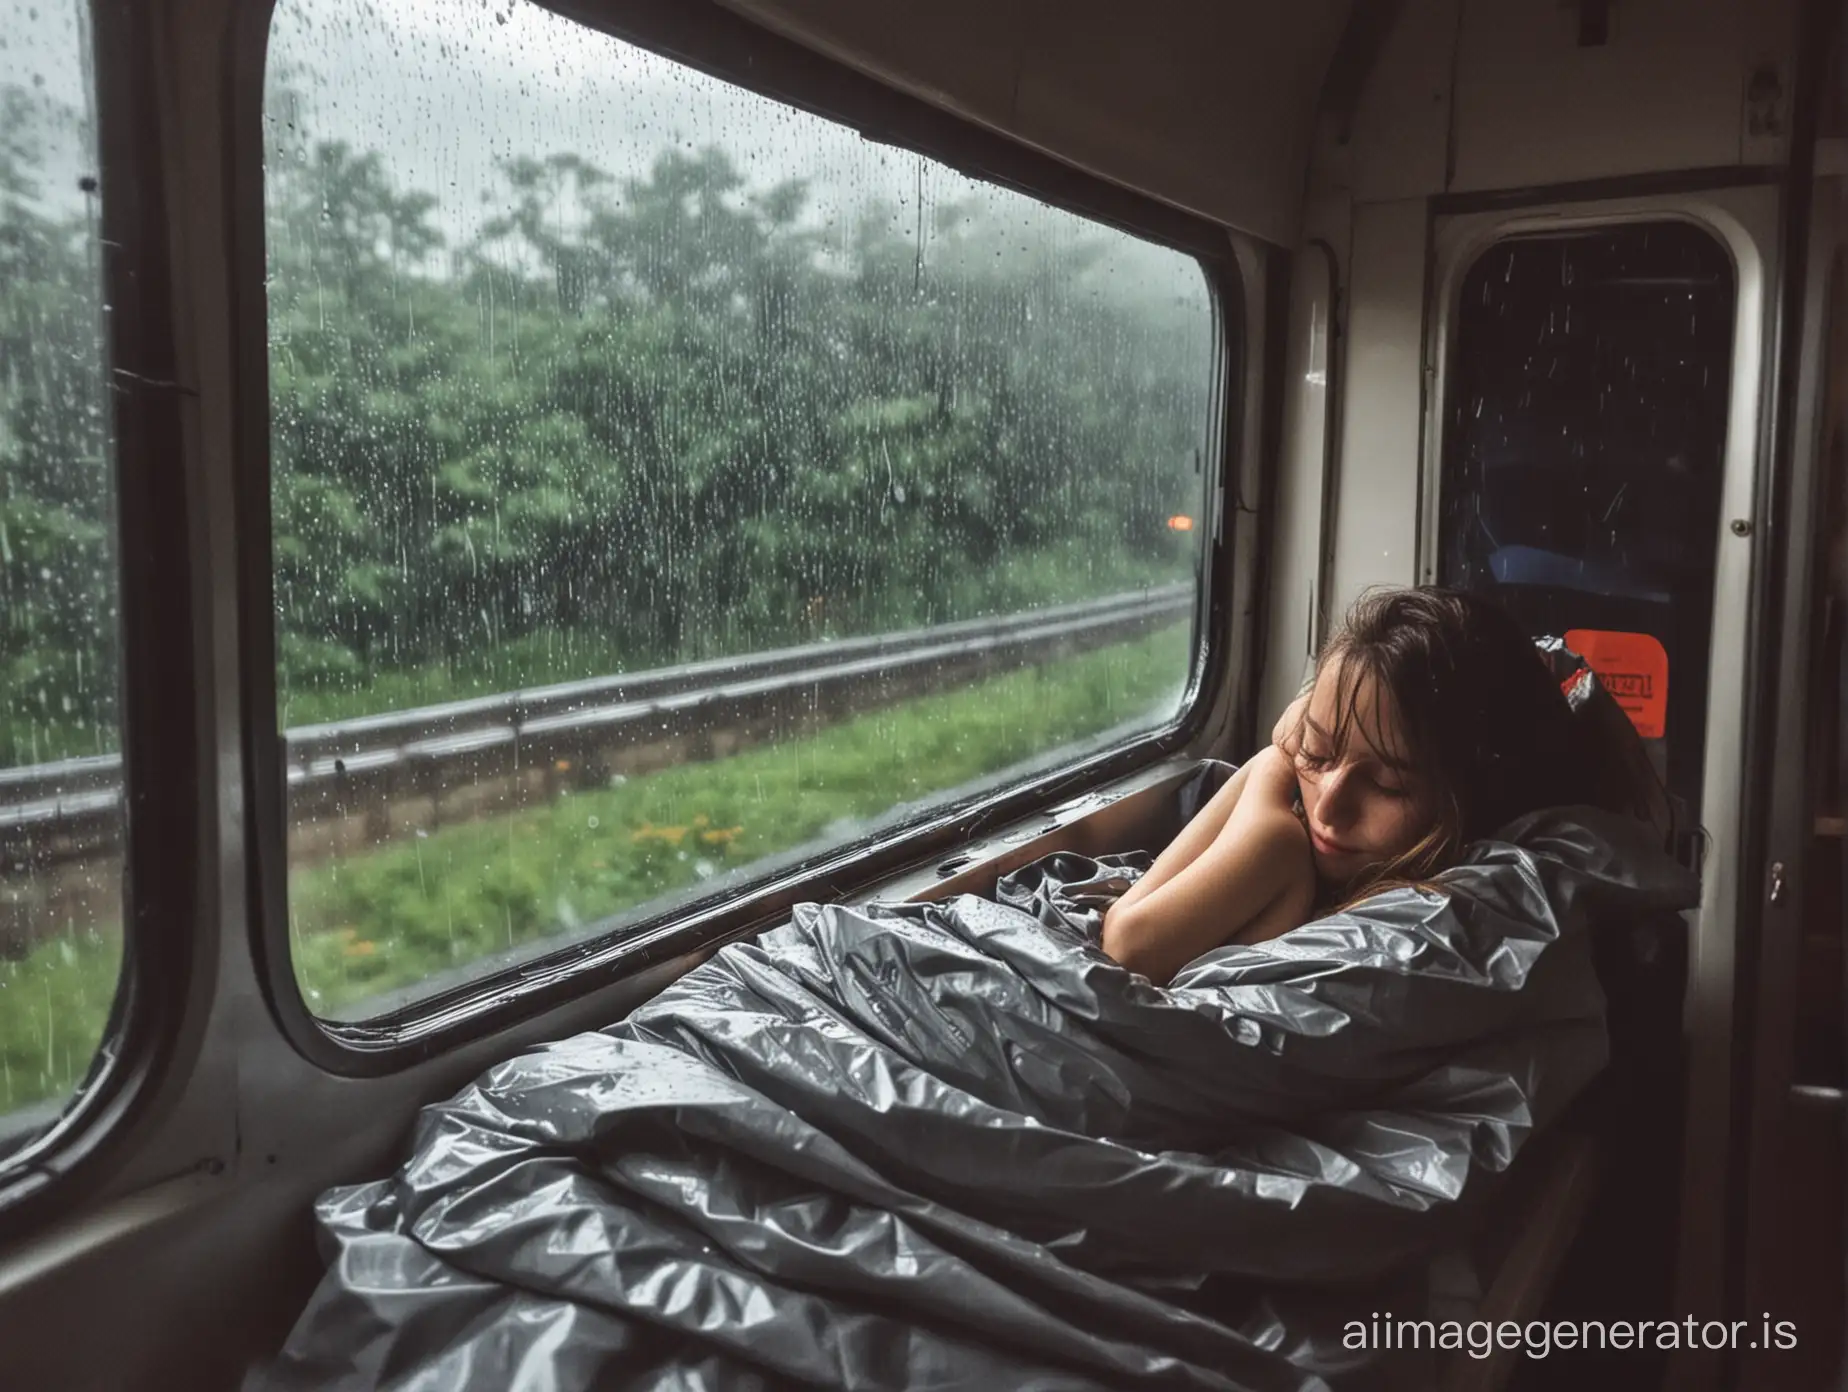 sleeping in train while it rains outside